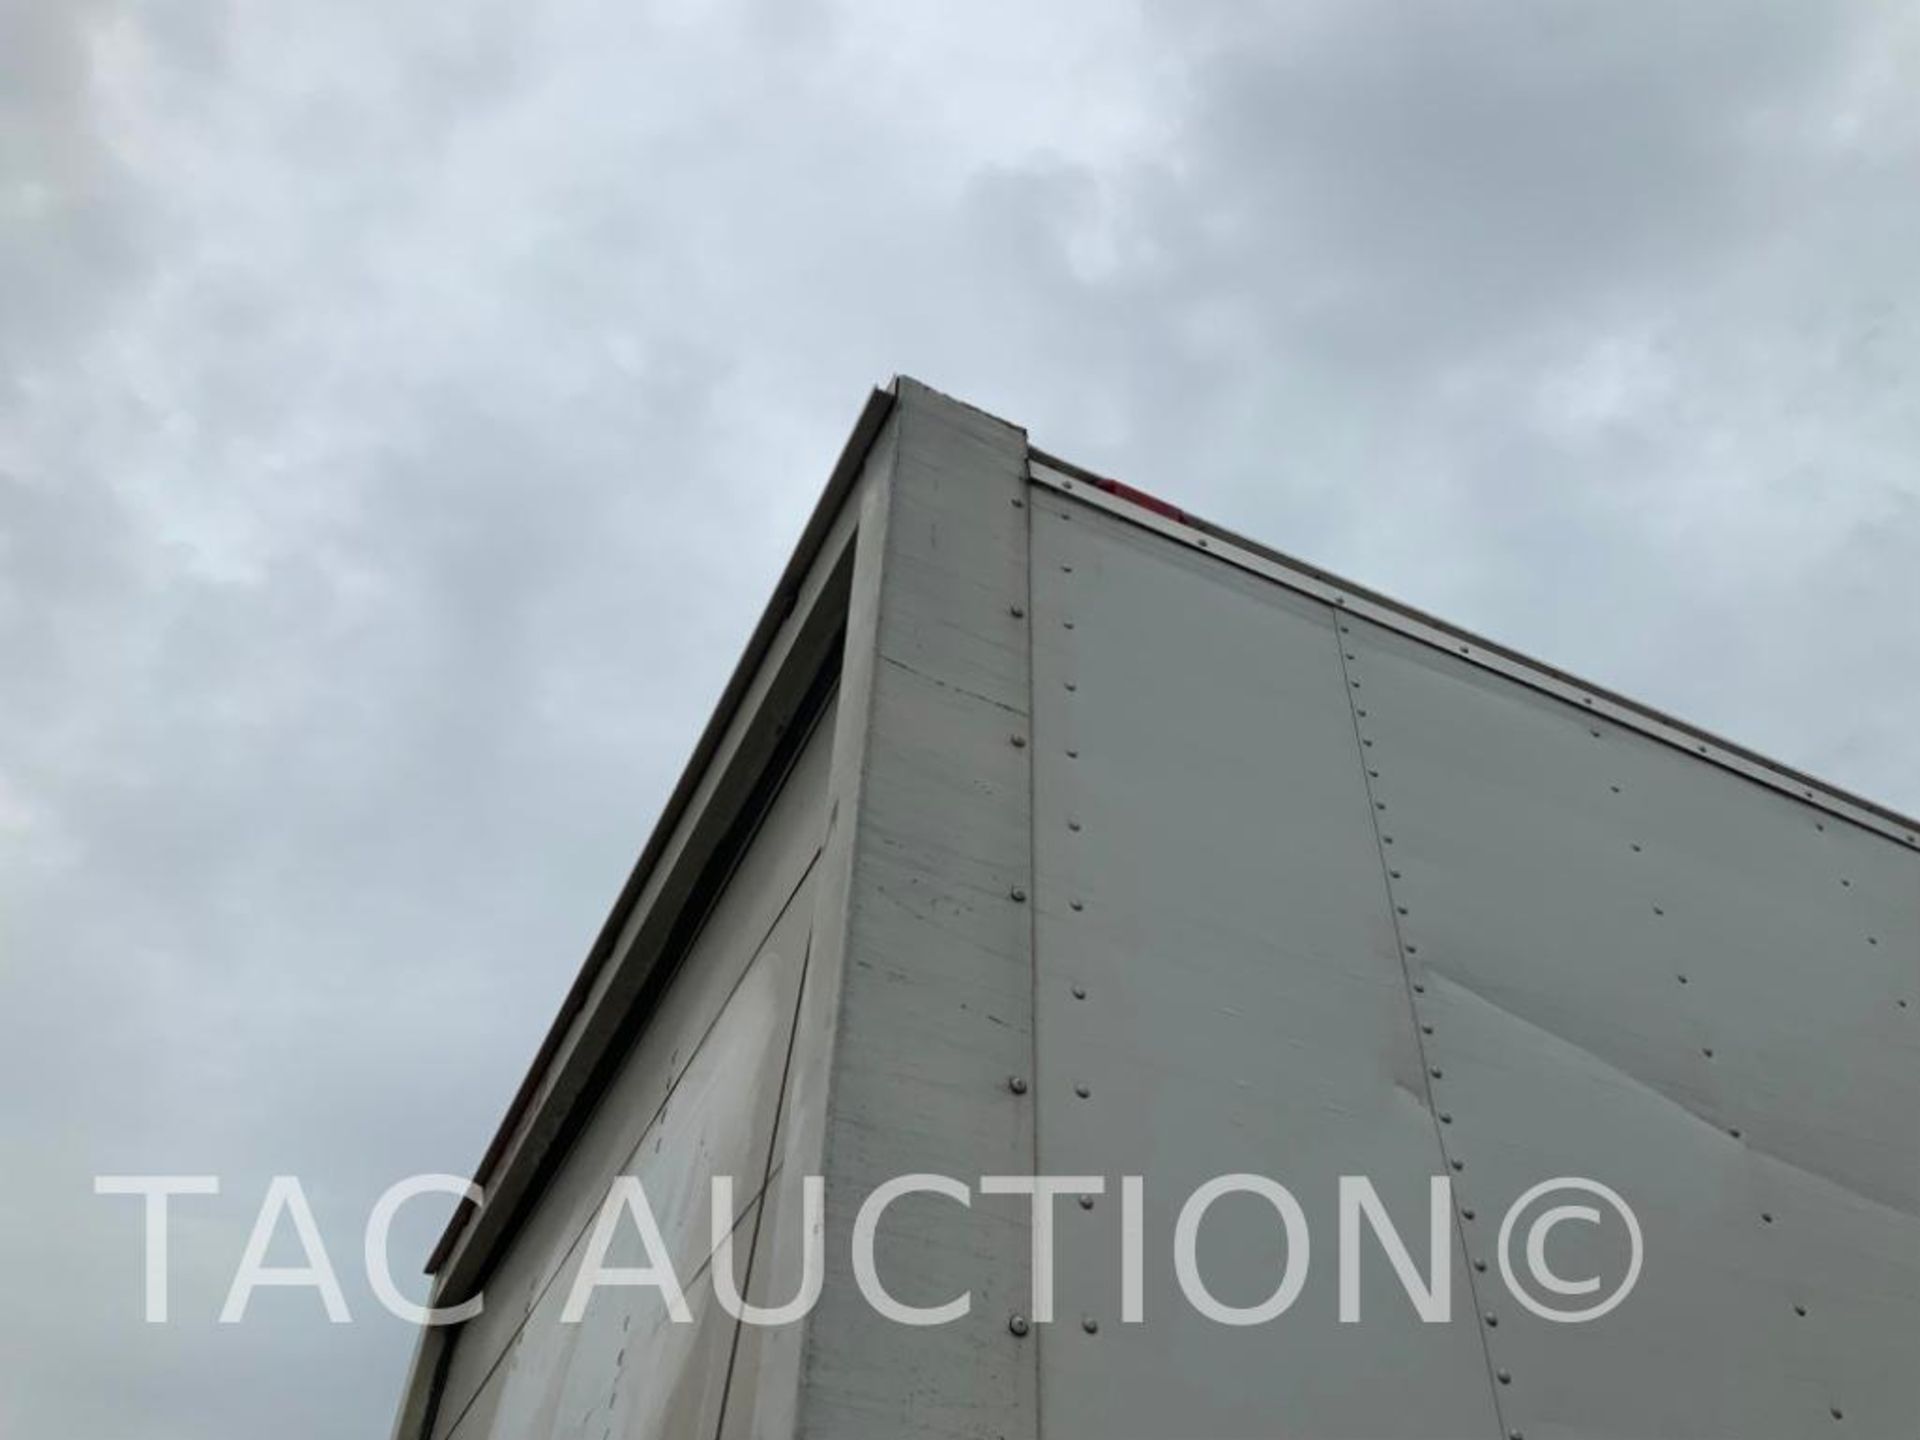 2015 Freightliner M2 26Foot Box Truck W/ Liftgate - Image 22 of 66